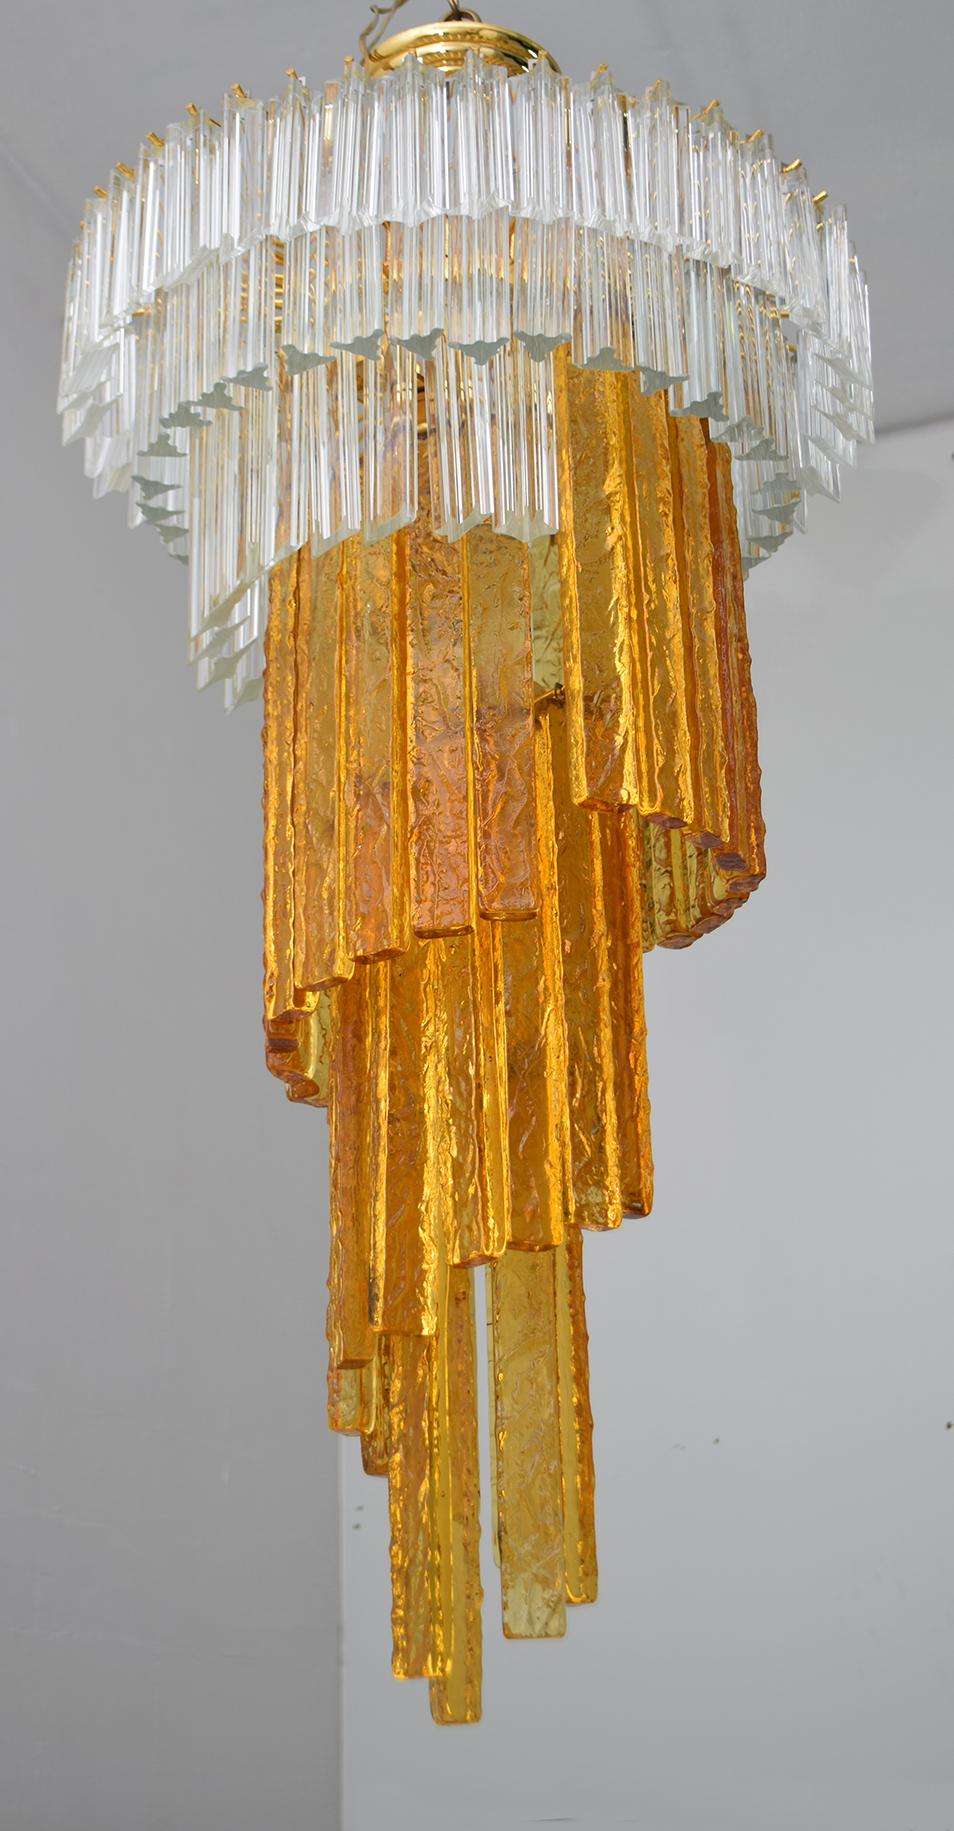 This chandelier was created by master glassmaker Albano Poli for his company Poliarte. Eight lights chandelier, with structure in gold chromed metal, amber Murano glass parallelepipeds and trihedrons and transparent Murano crystal panels, to create